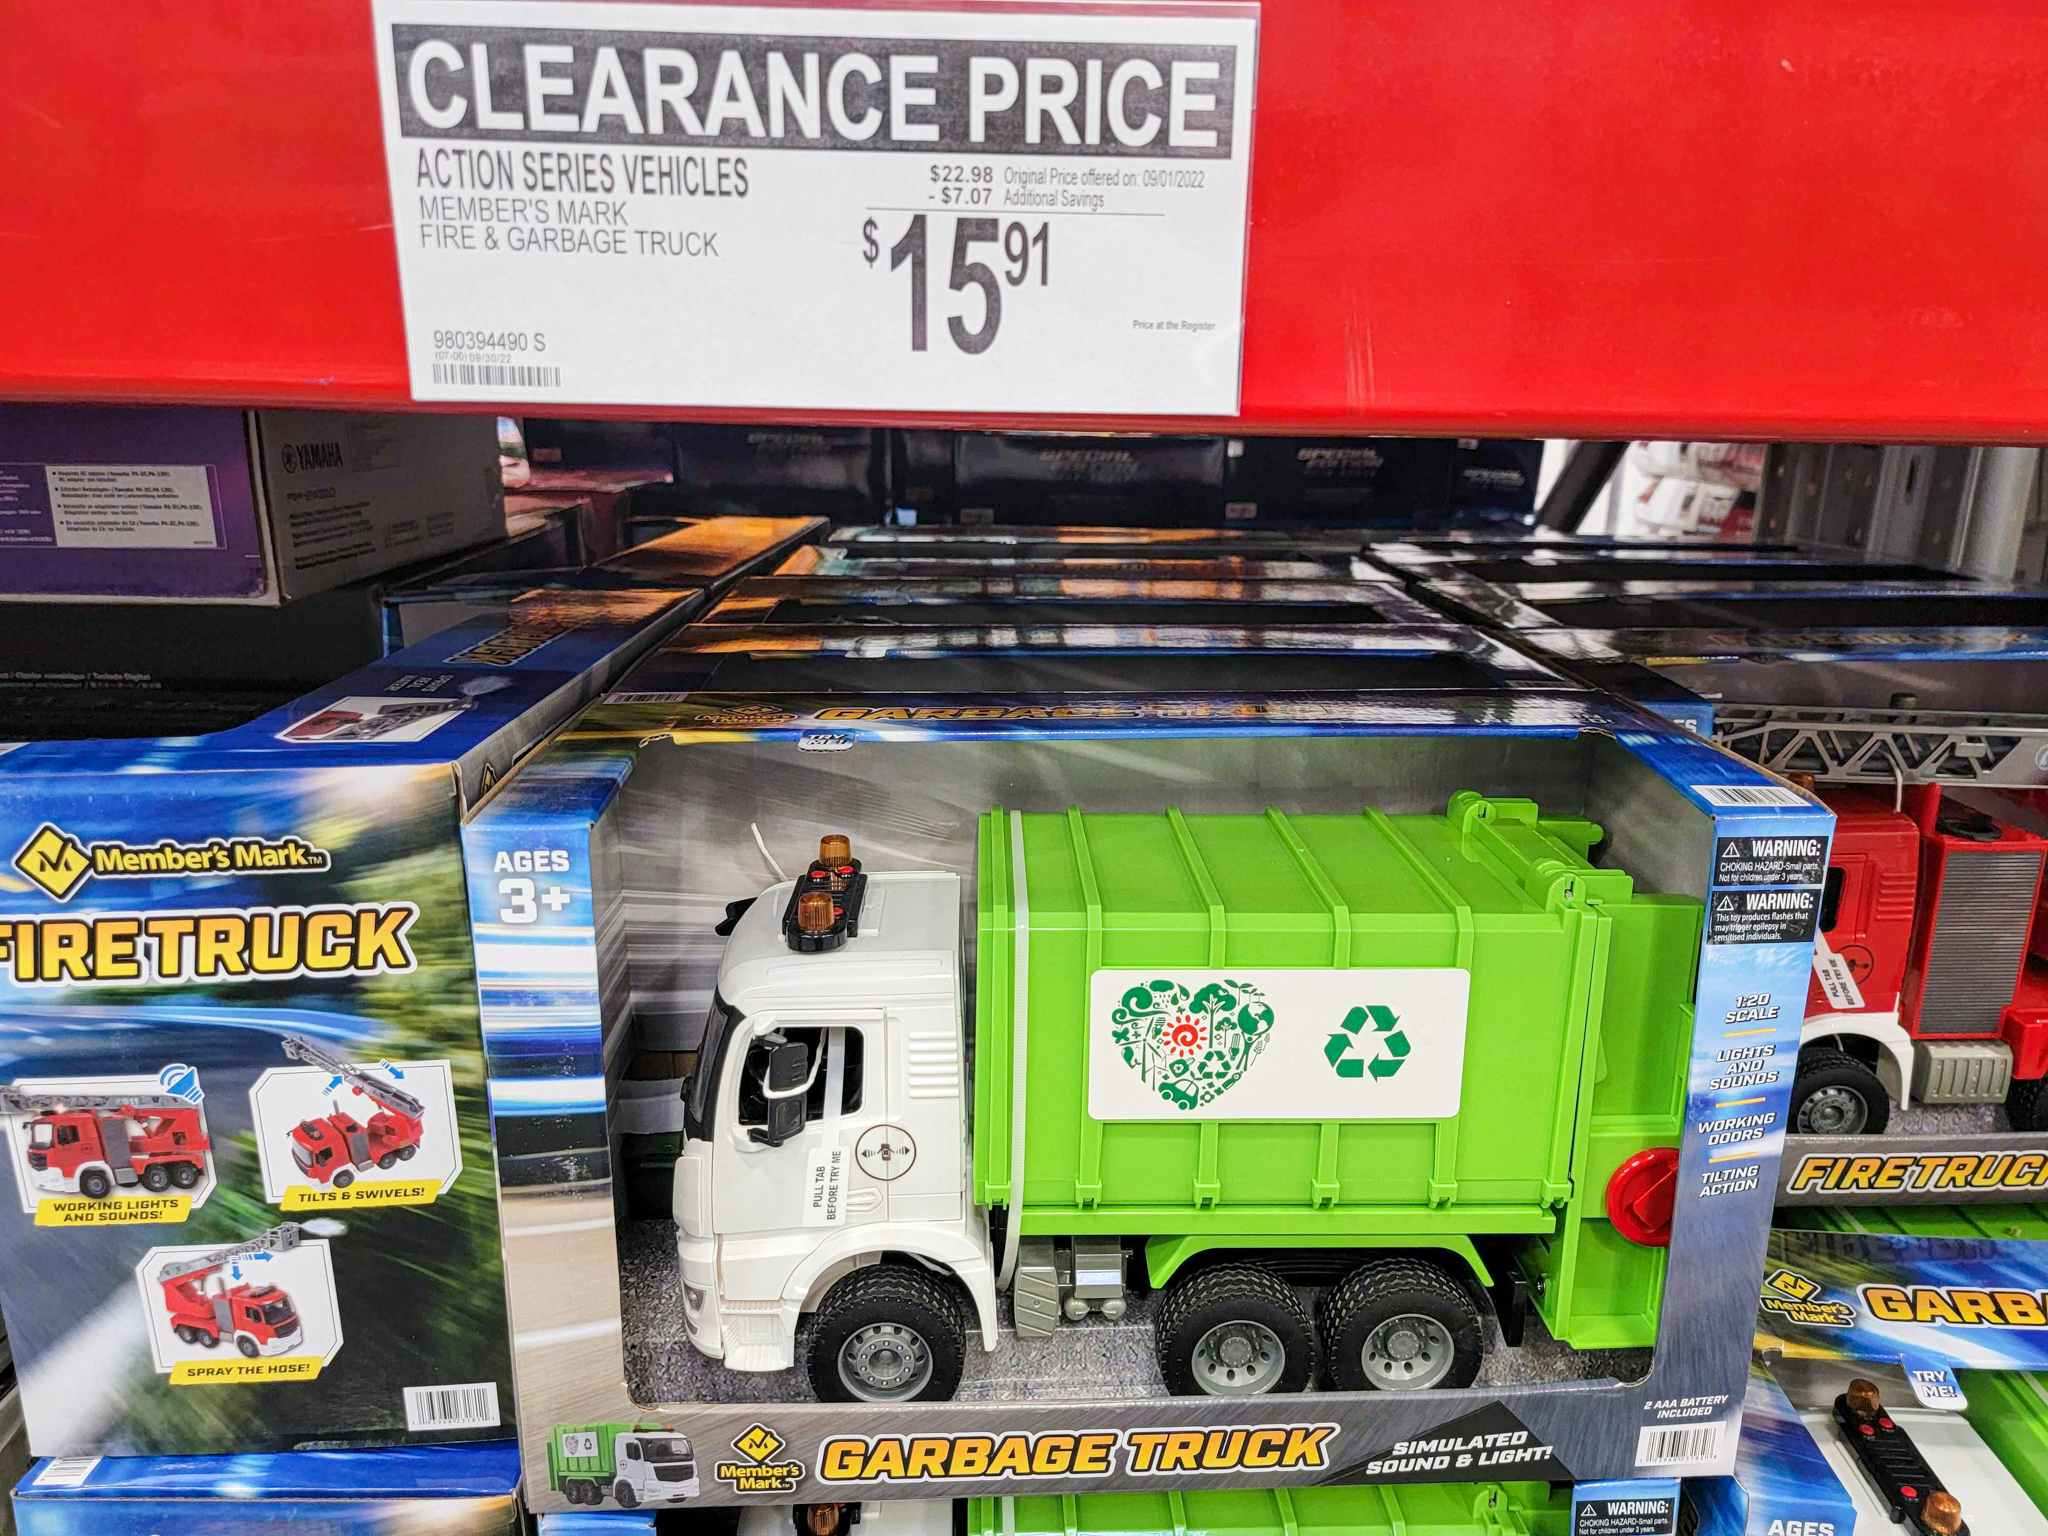 garbage truck toy with a 15.91 clearance tag